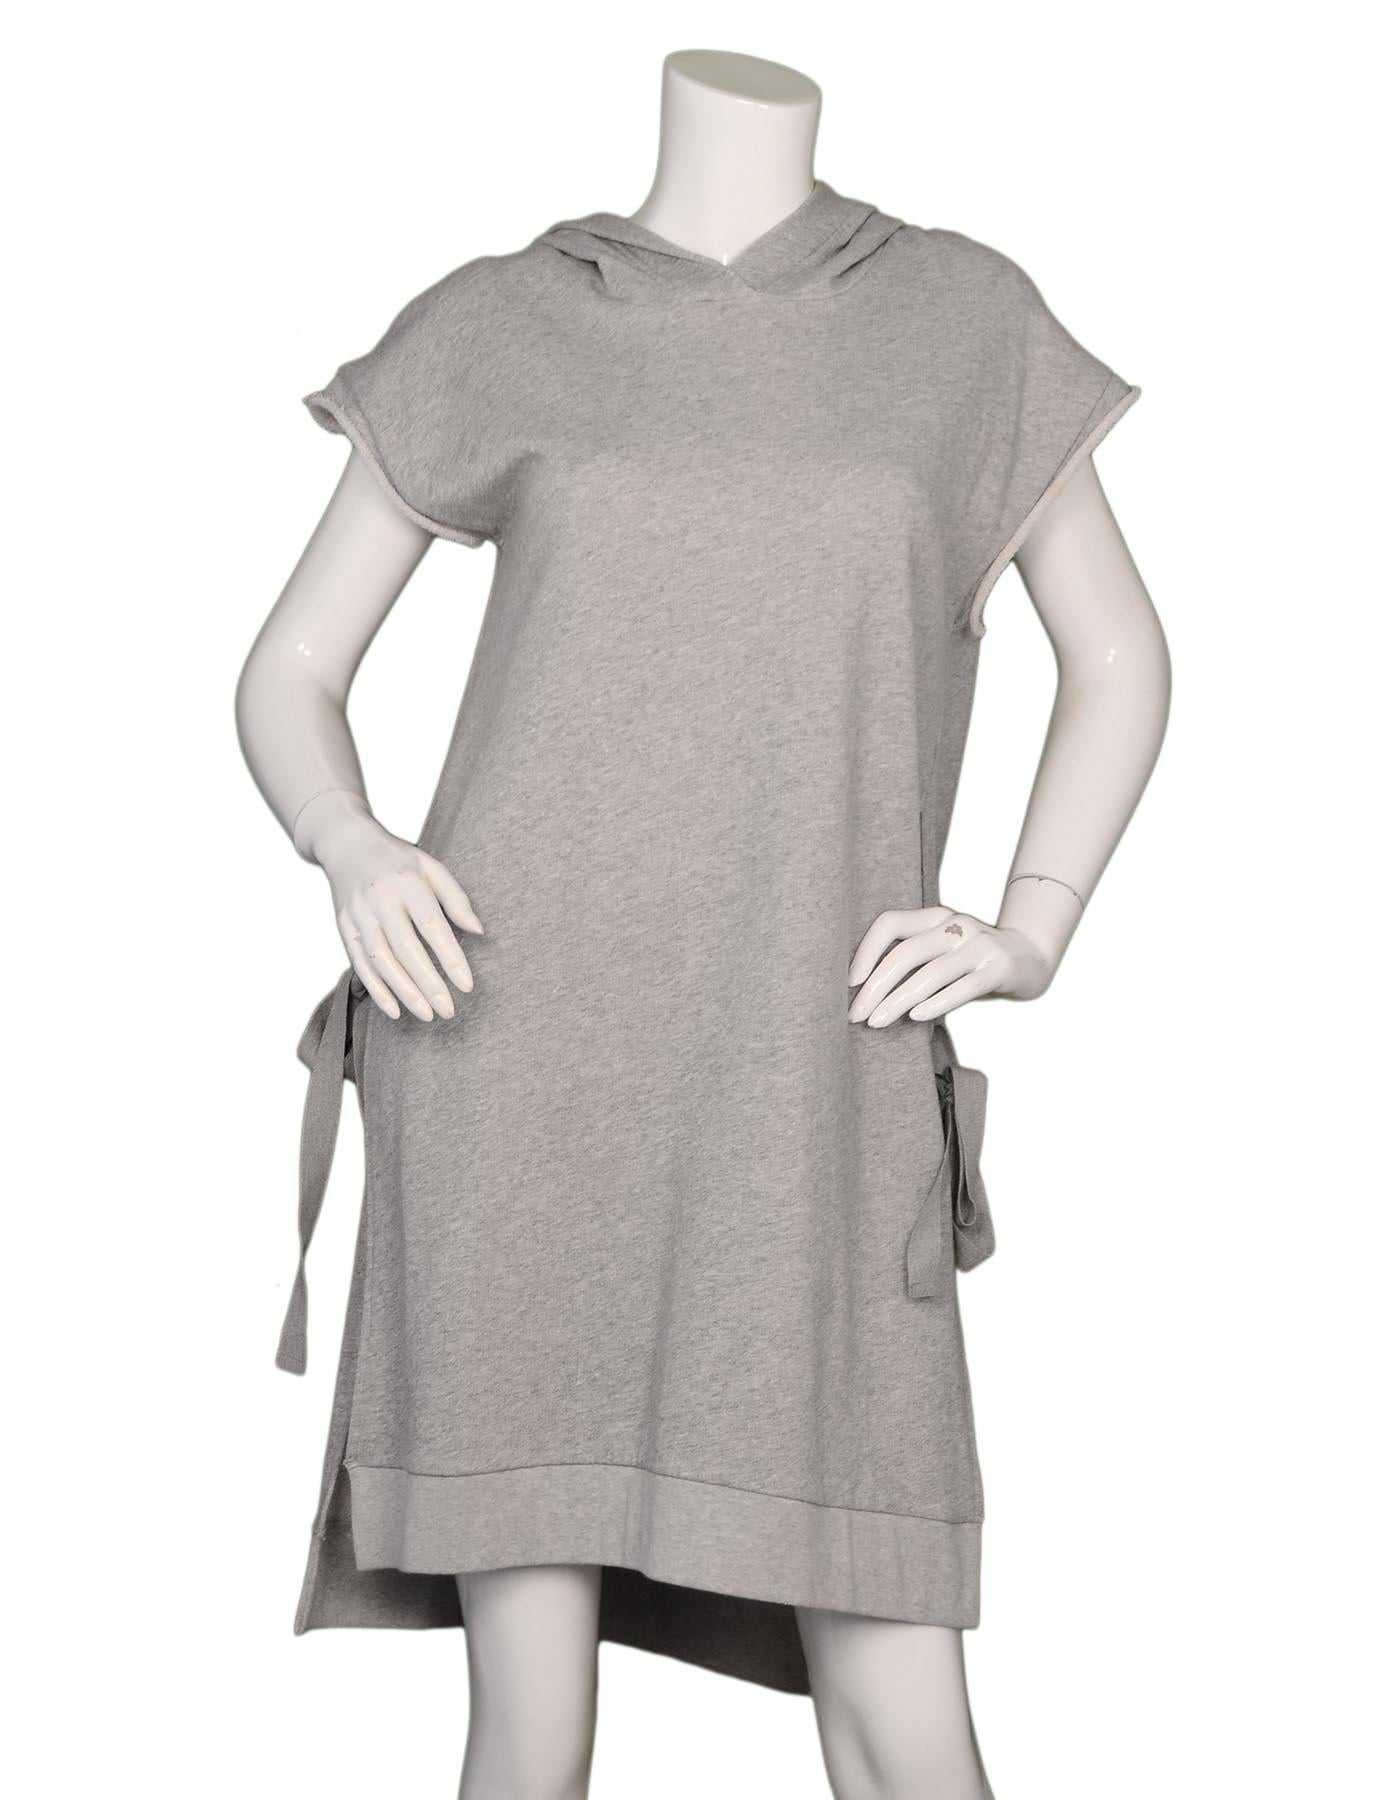 Maison Martin Margiela Grey Hooded Side Tie Sweatshirt Dress Sz M

Made In: Turkey
Color: Grey
Materials: 100% cotton
Opening/Closure: Pull over
Overall Condition: Excellent pre-owned condition 

Measurements: 
Shoulder To Shoulder:   21